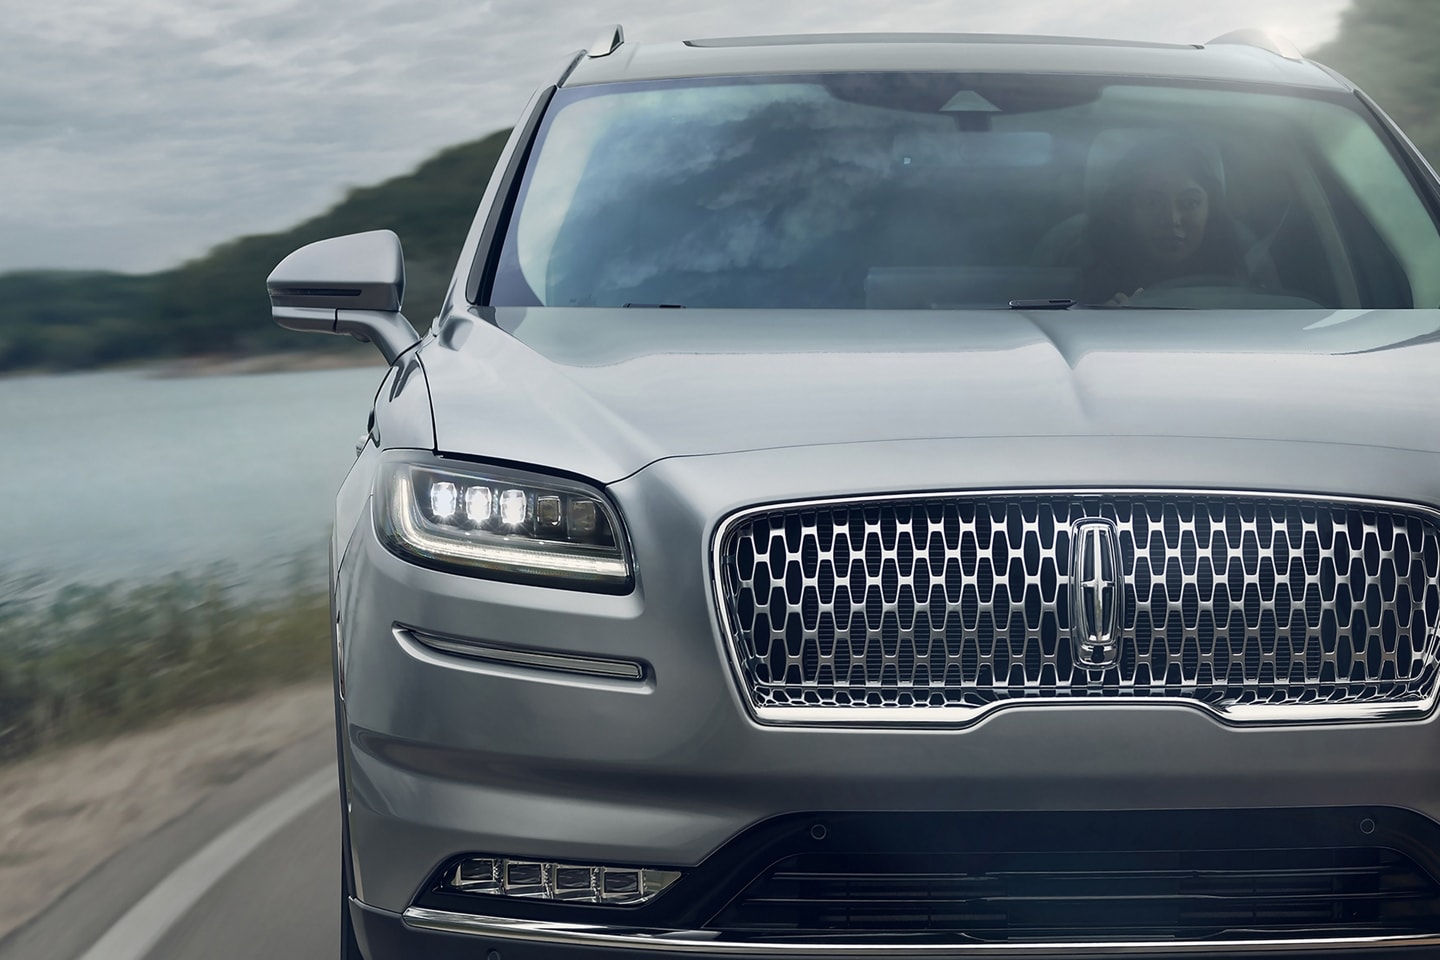     The front end of the 2023 Lincoln Nautilus® SUV is being driven around a curve in a lake side road